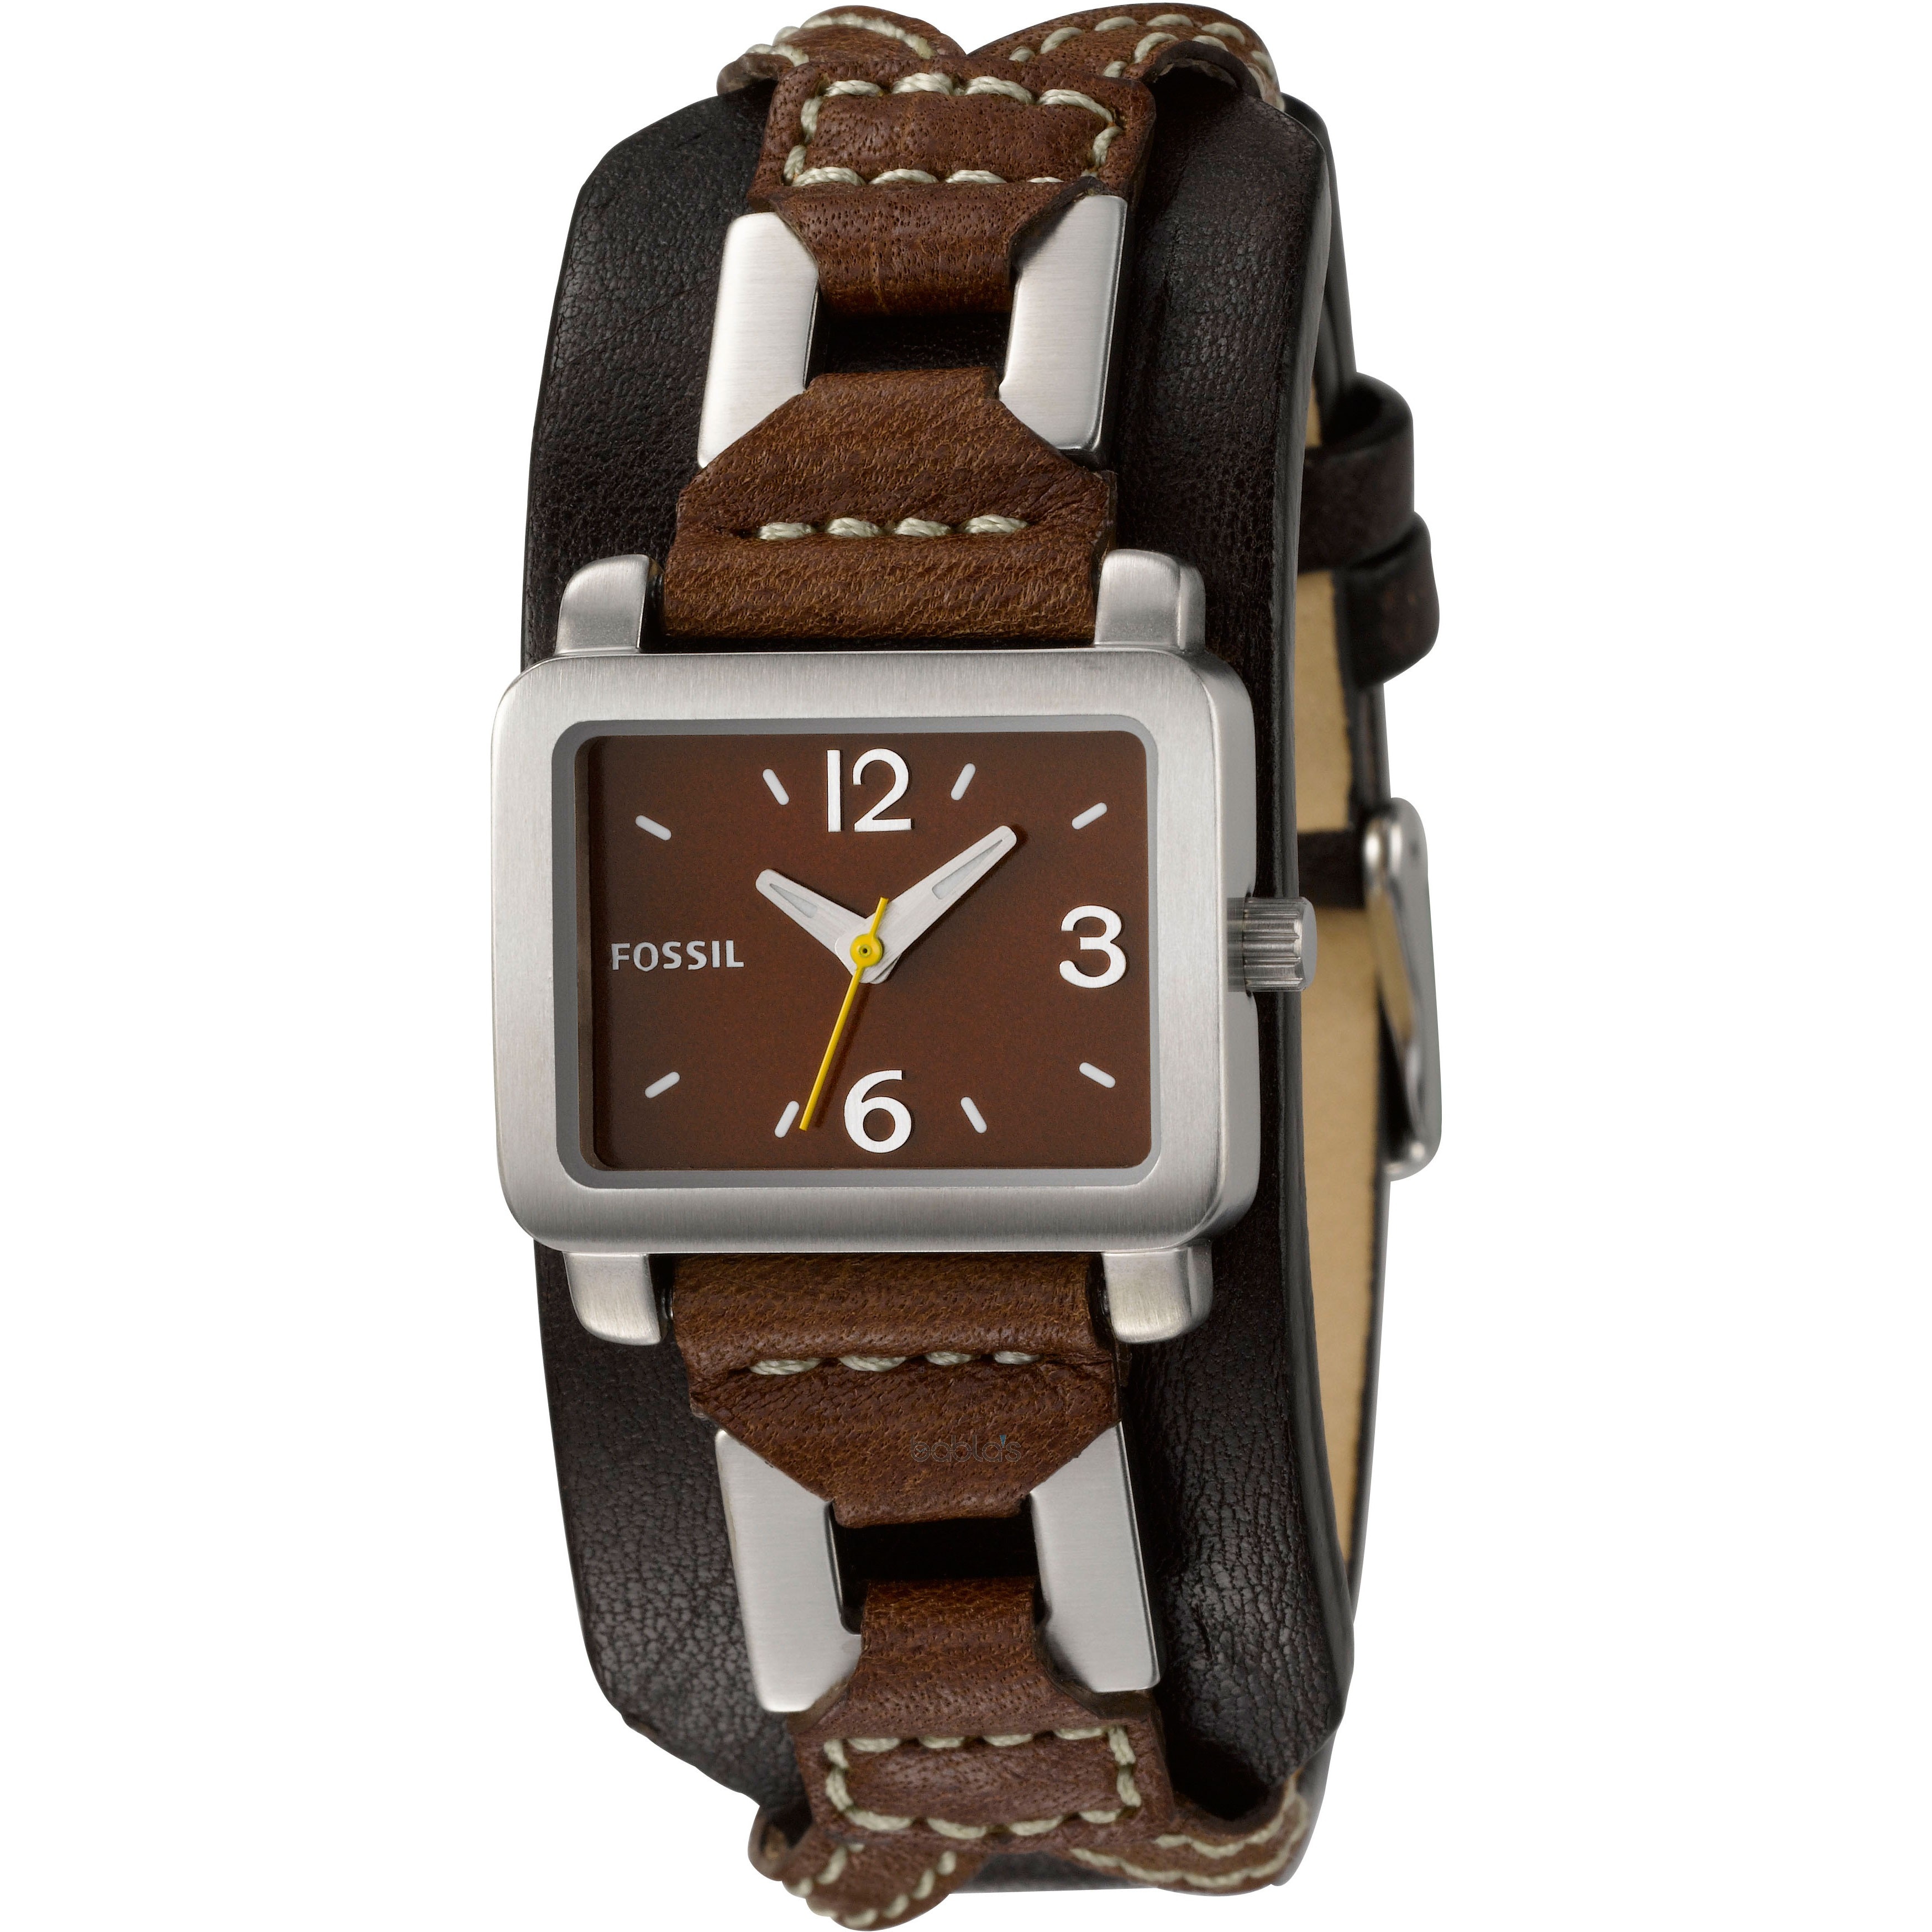 Fossil Womens Leather Strap Analog Watch